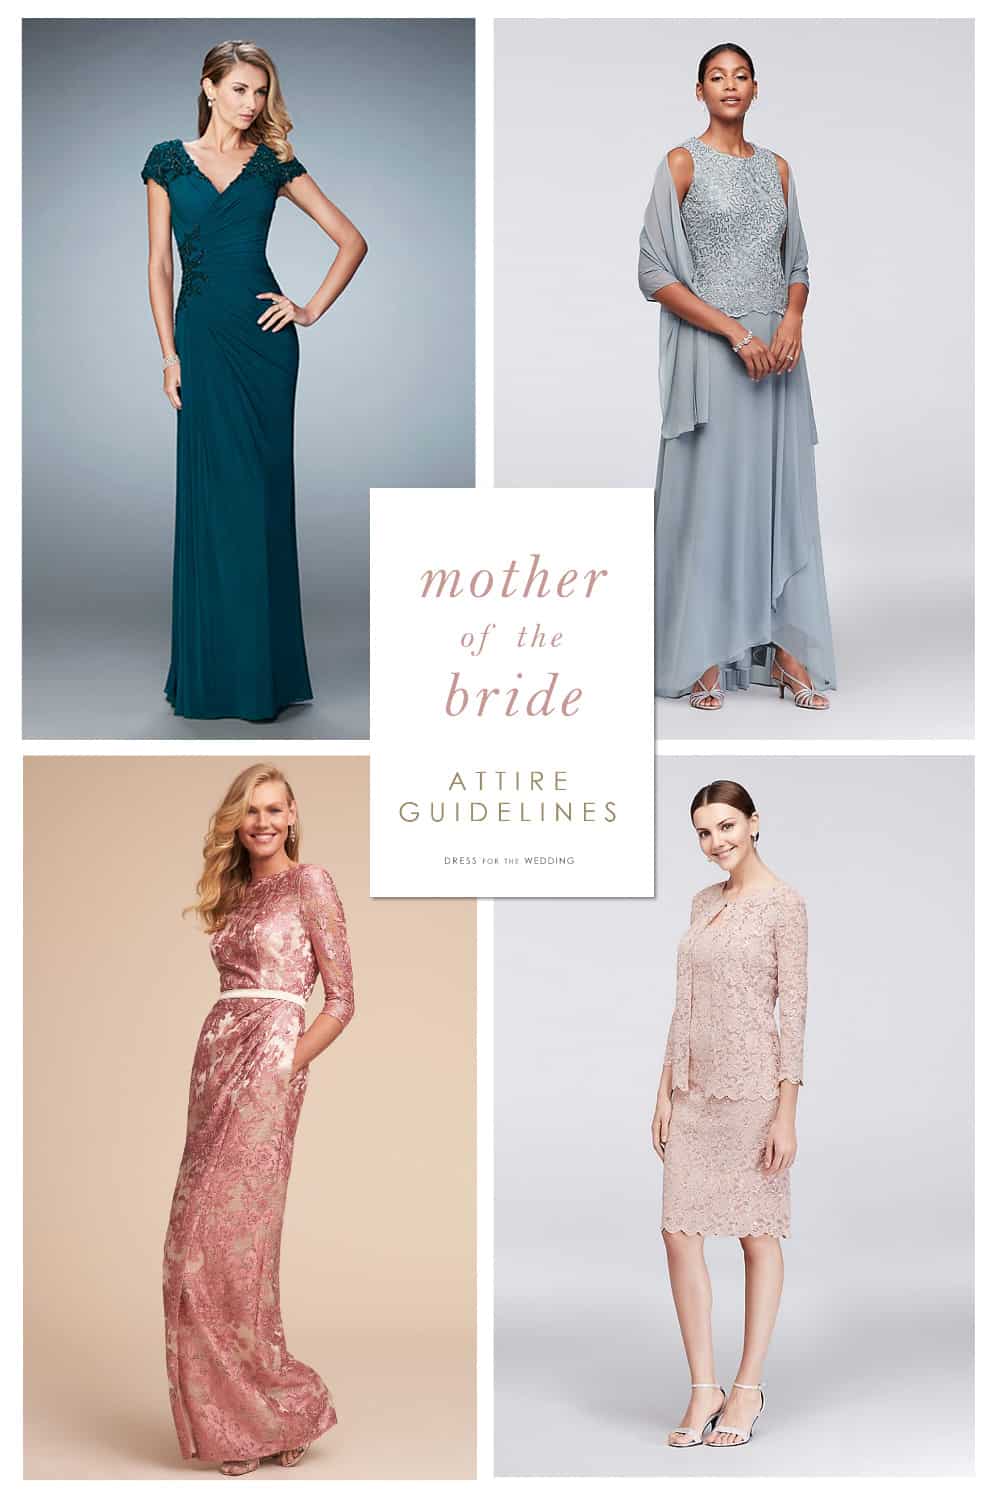 A Guide to Mother-of-the-Bride Duties